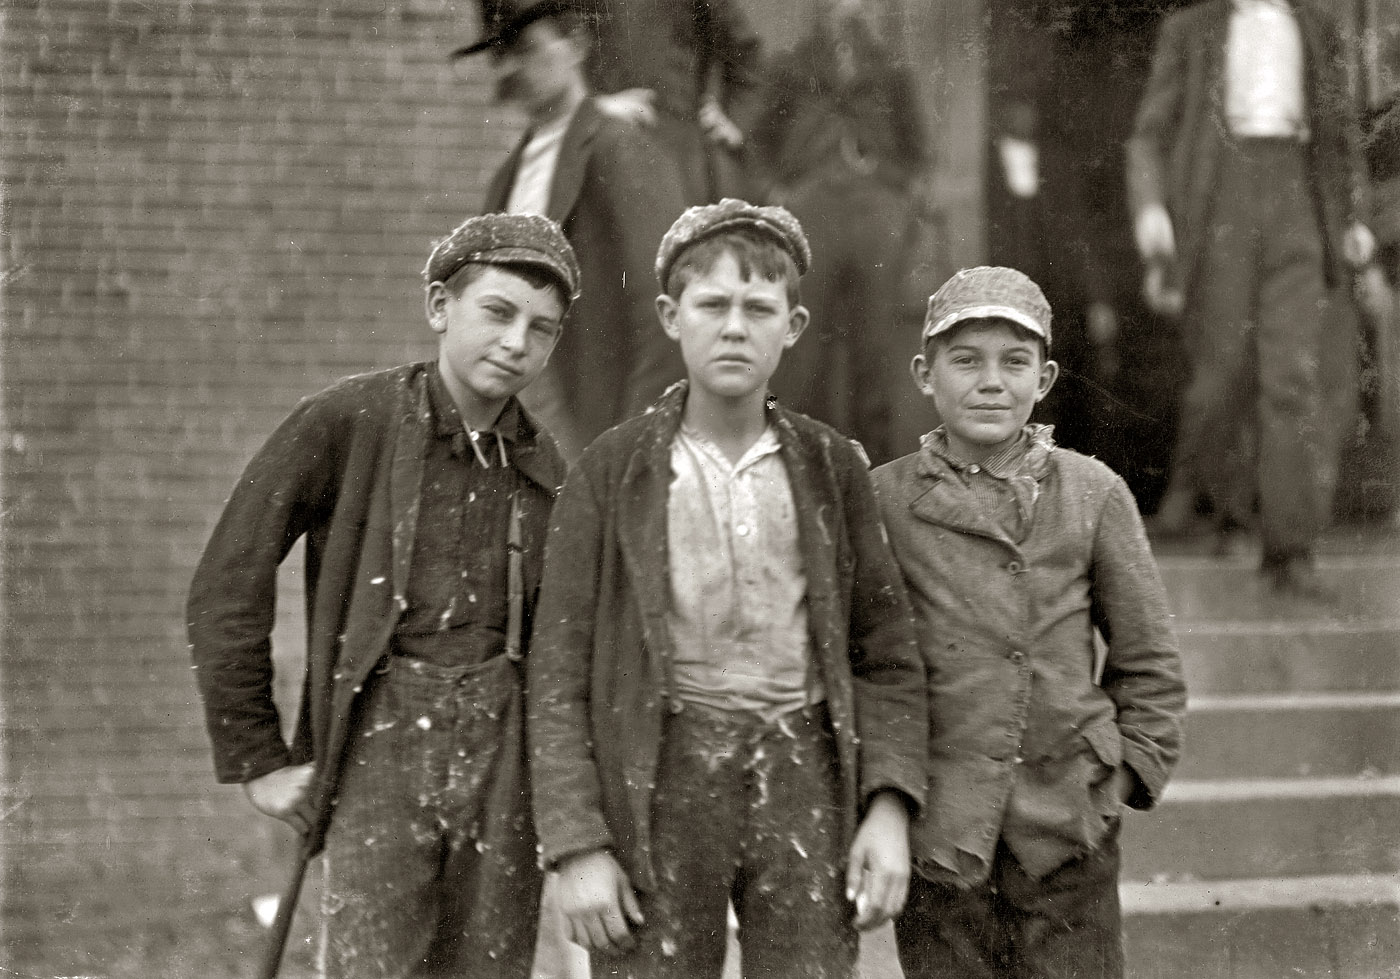 November 1908. Gastonia, North Carolina. "Going home from Loray Mill. Smallest boy on the right-hand end, John Moore. 13 years old. Been in mill 6 years as sweeper, doffer and spinner." Photo by Lewis Wickes Hine. View full size.